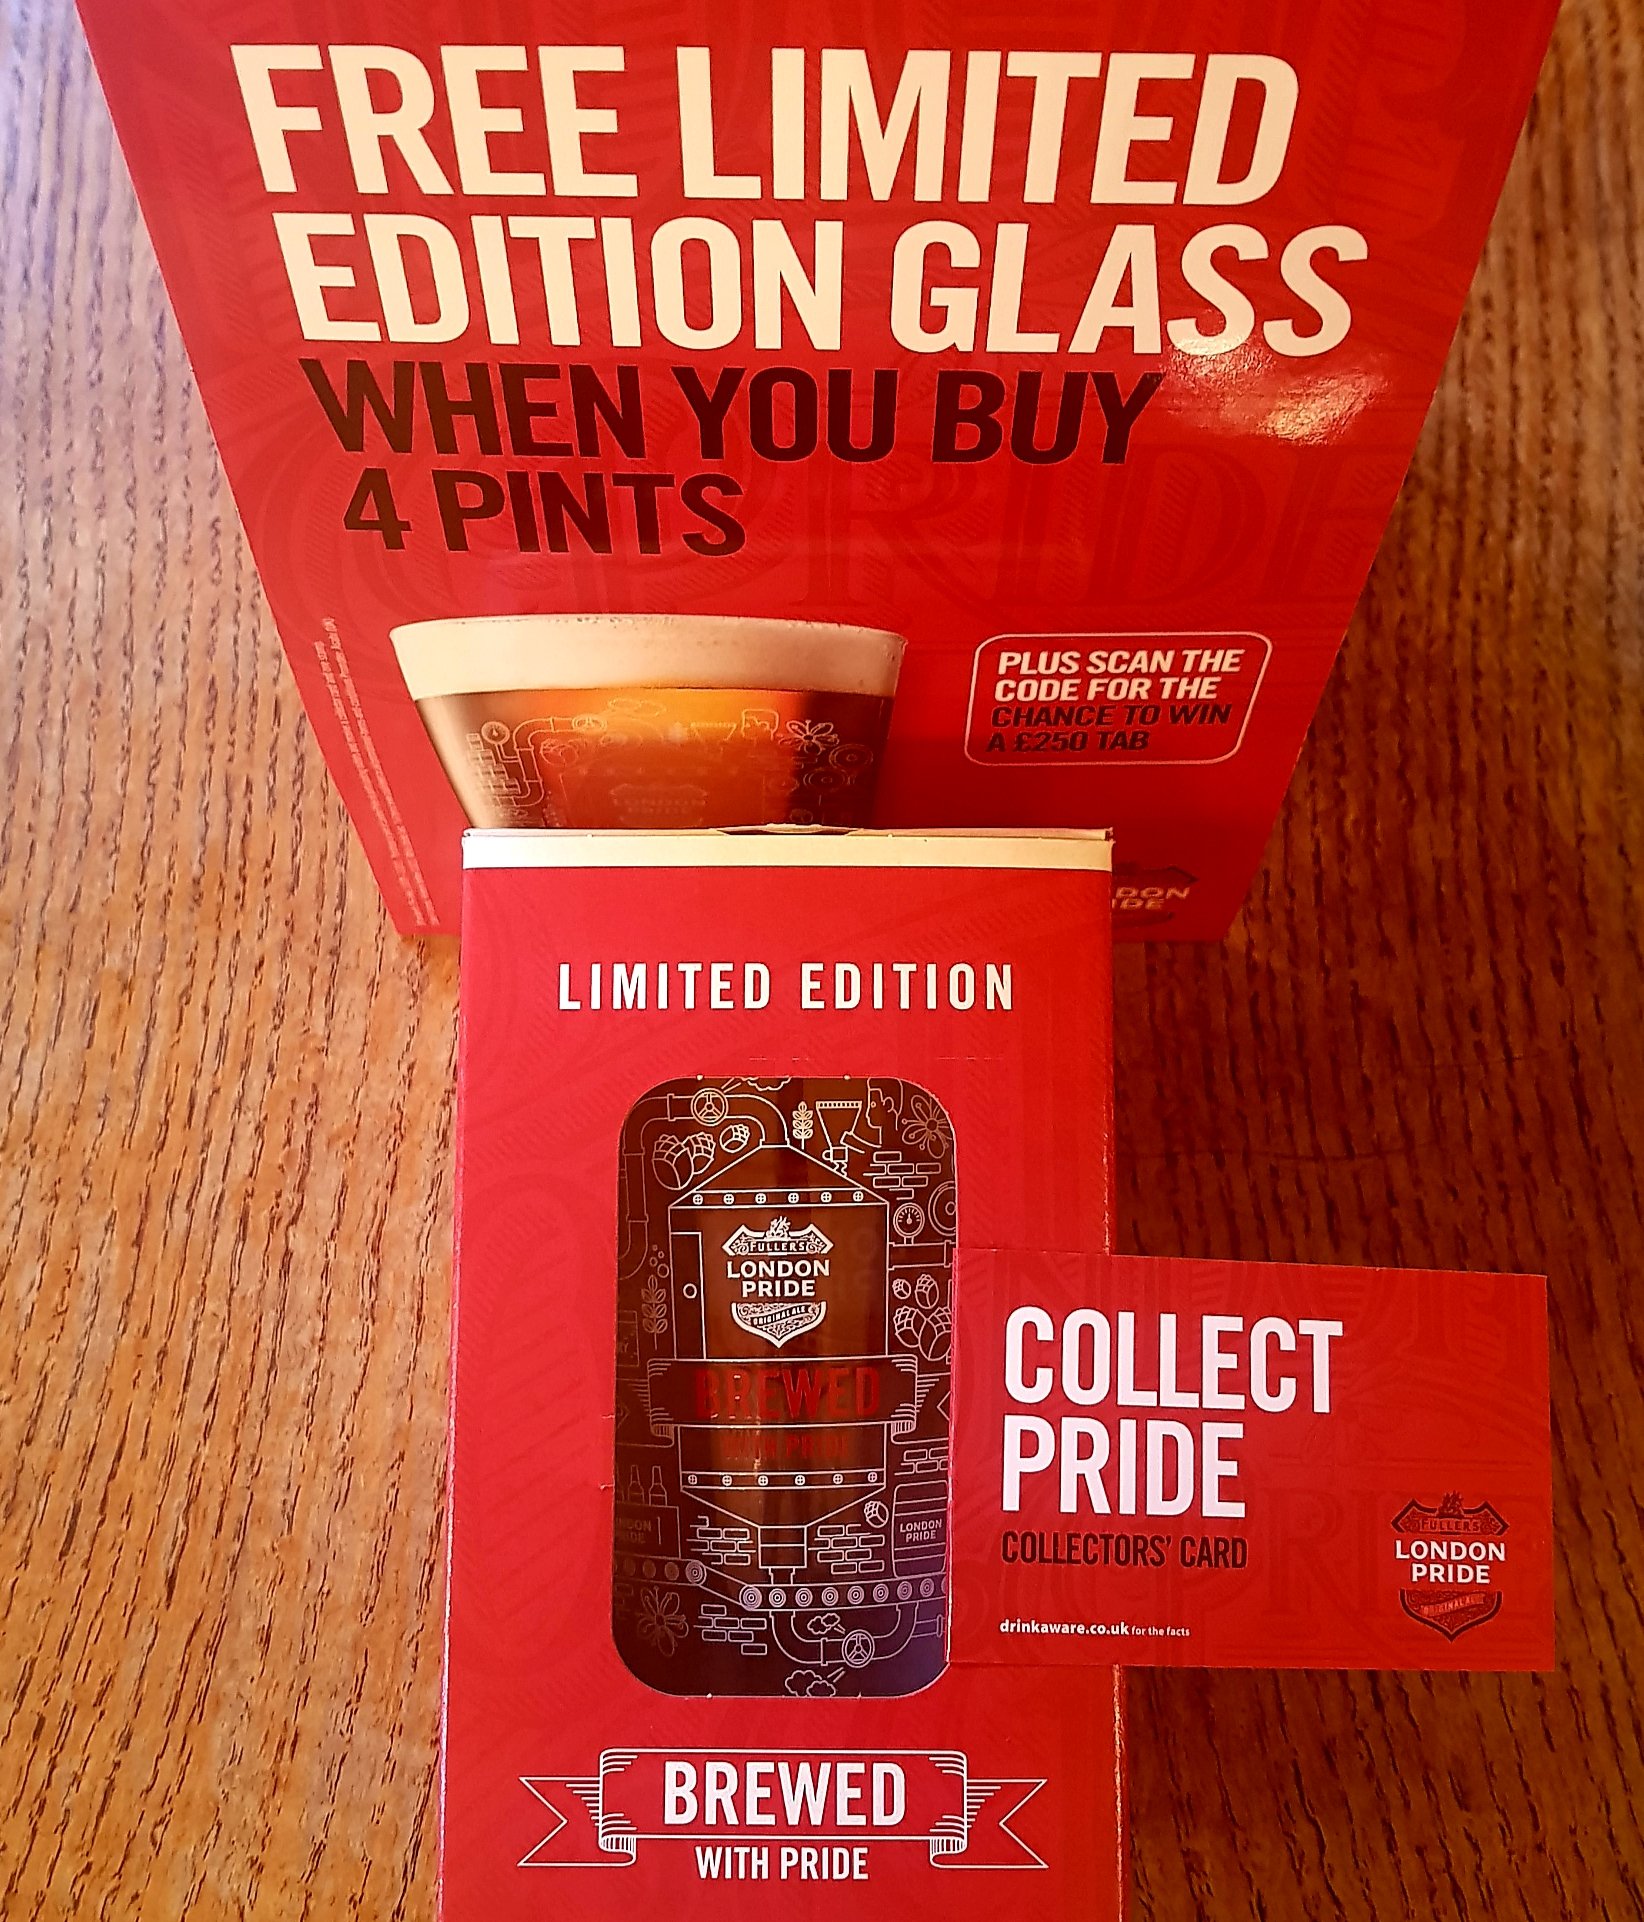 Fullers London Pride 60th Anniversary Pint Glasses New Set of 2 Boxed 